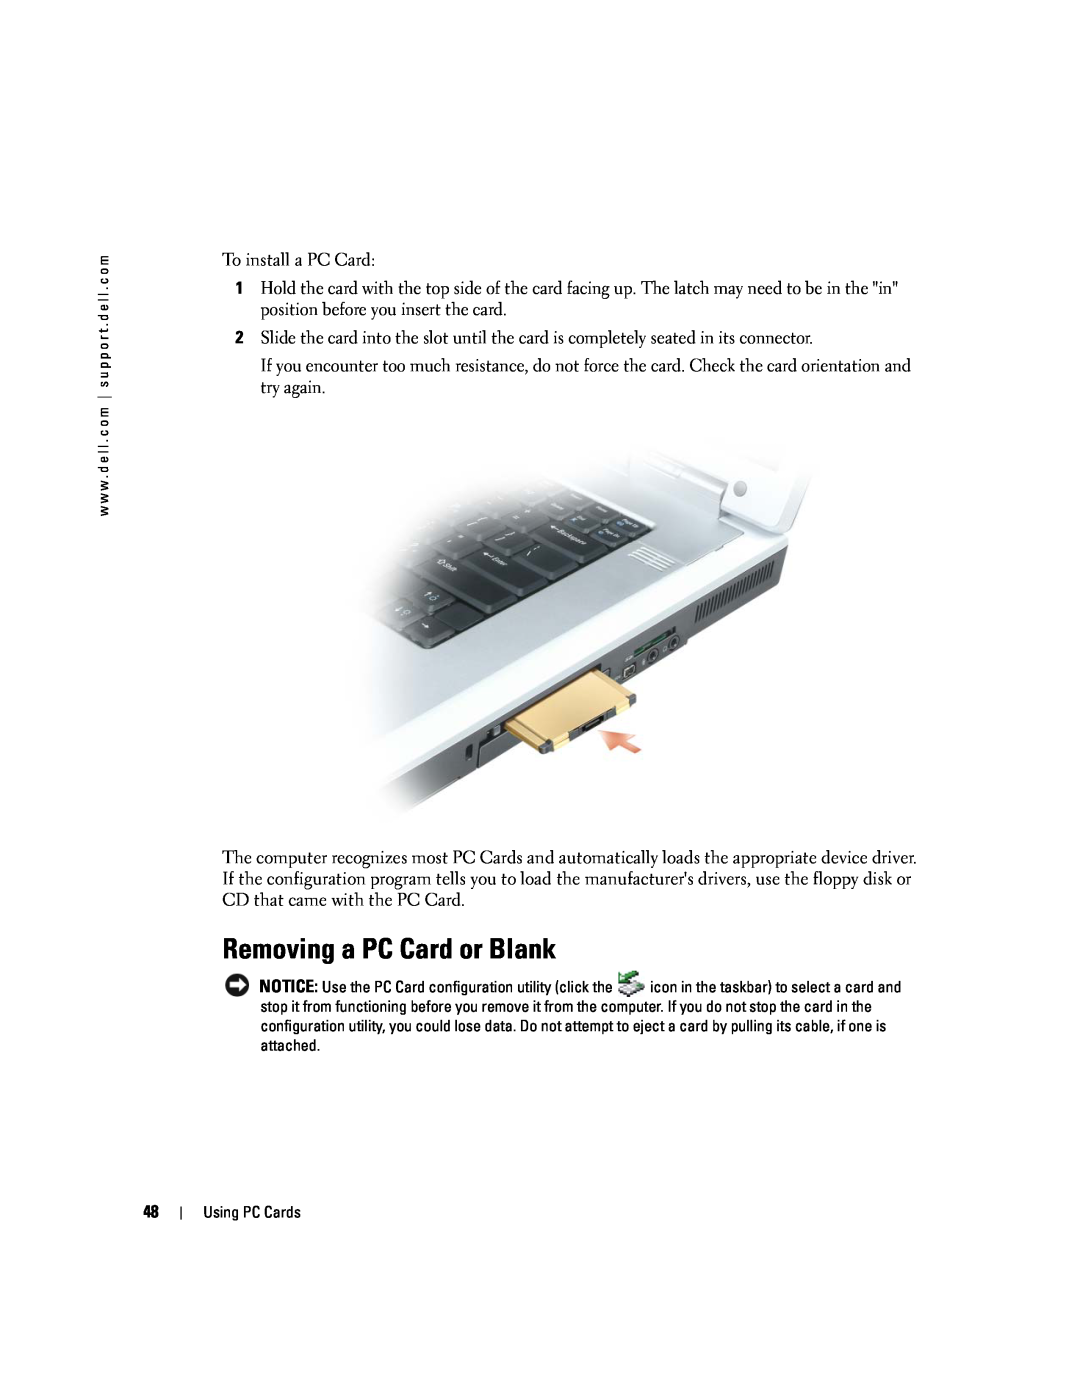 Dell 9300 owner manual Removing a PC Card or Blank, To install a PC Card 